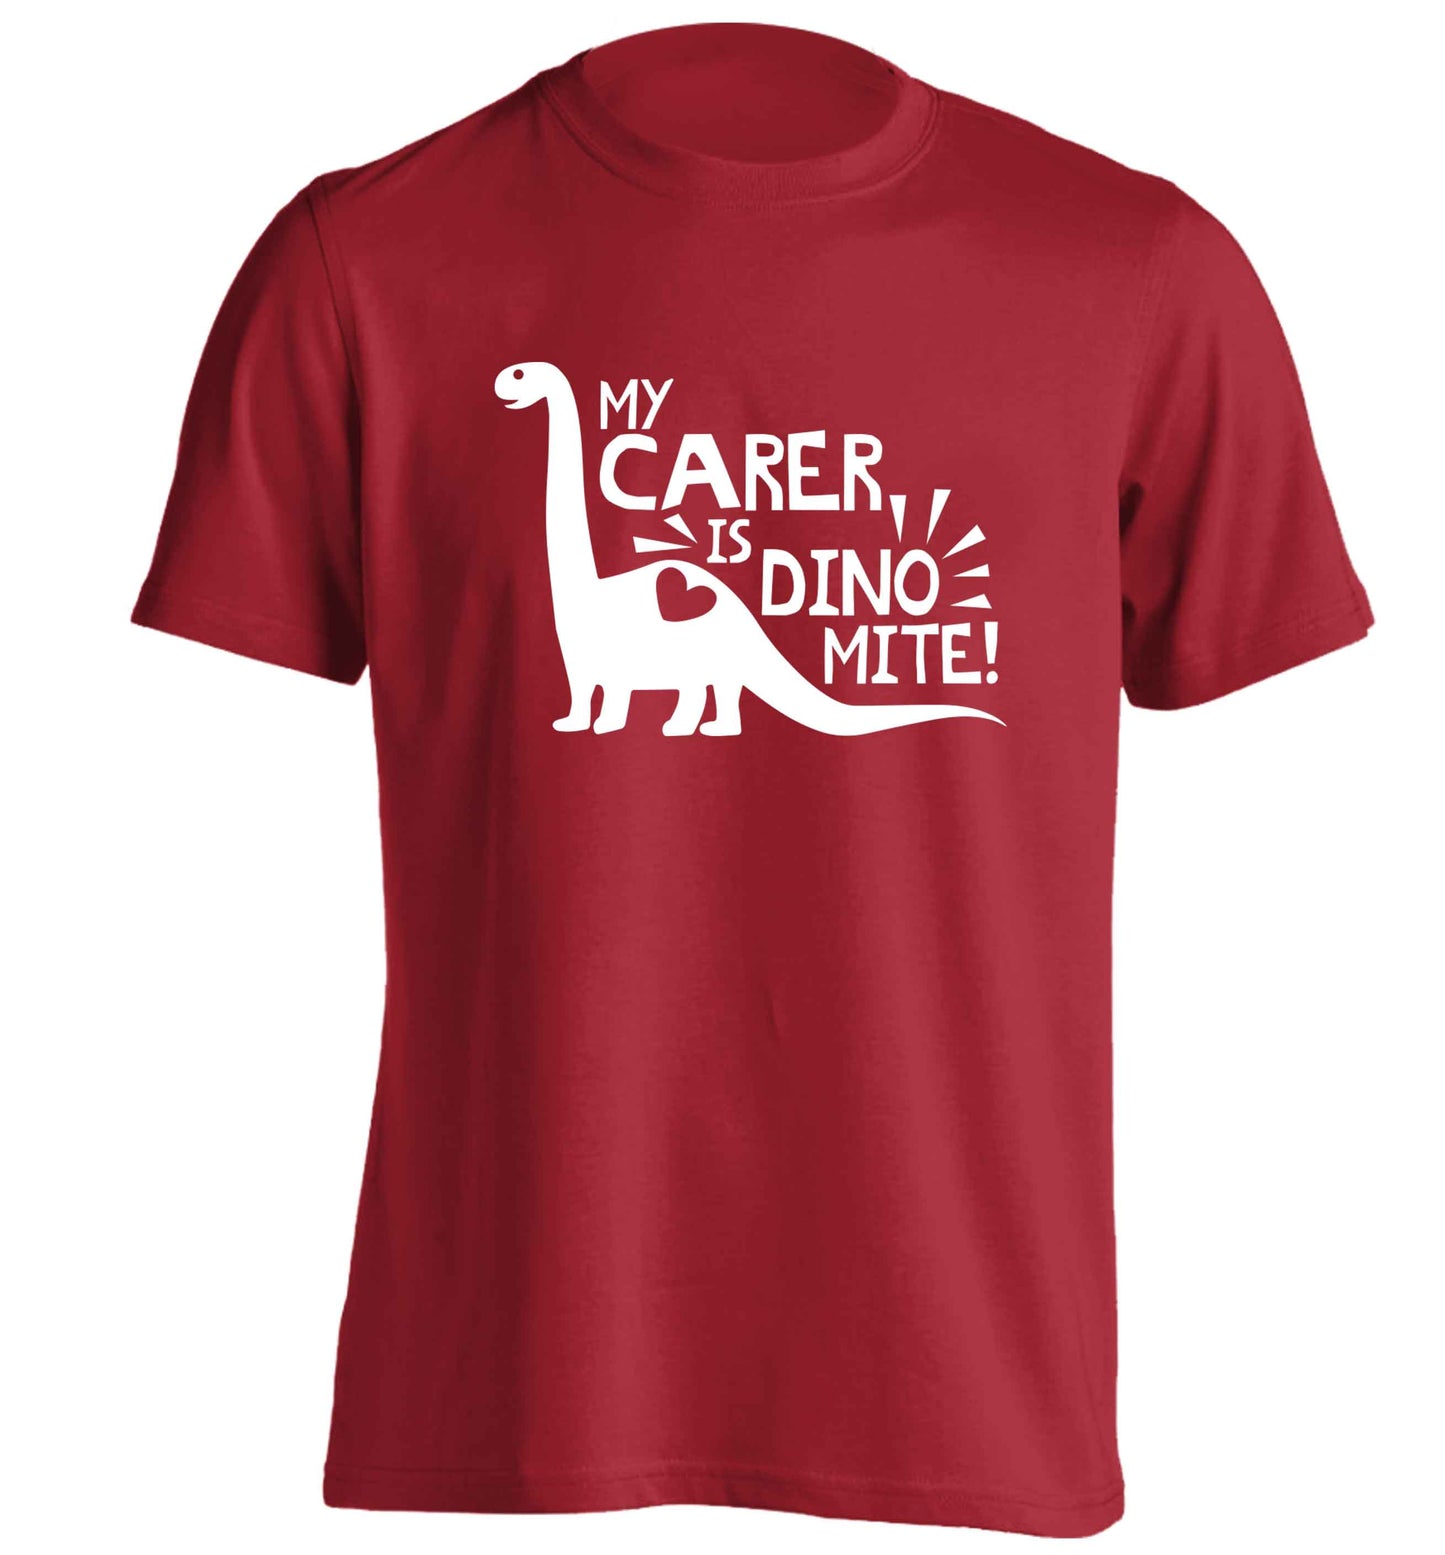 My carer is dinomite! adults unisex red Tshirt 2XL